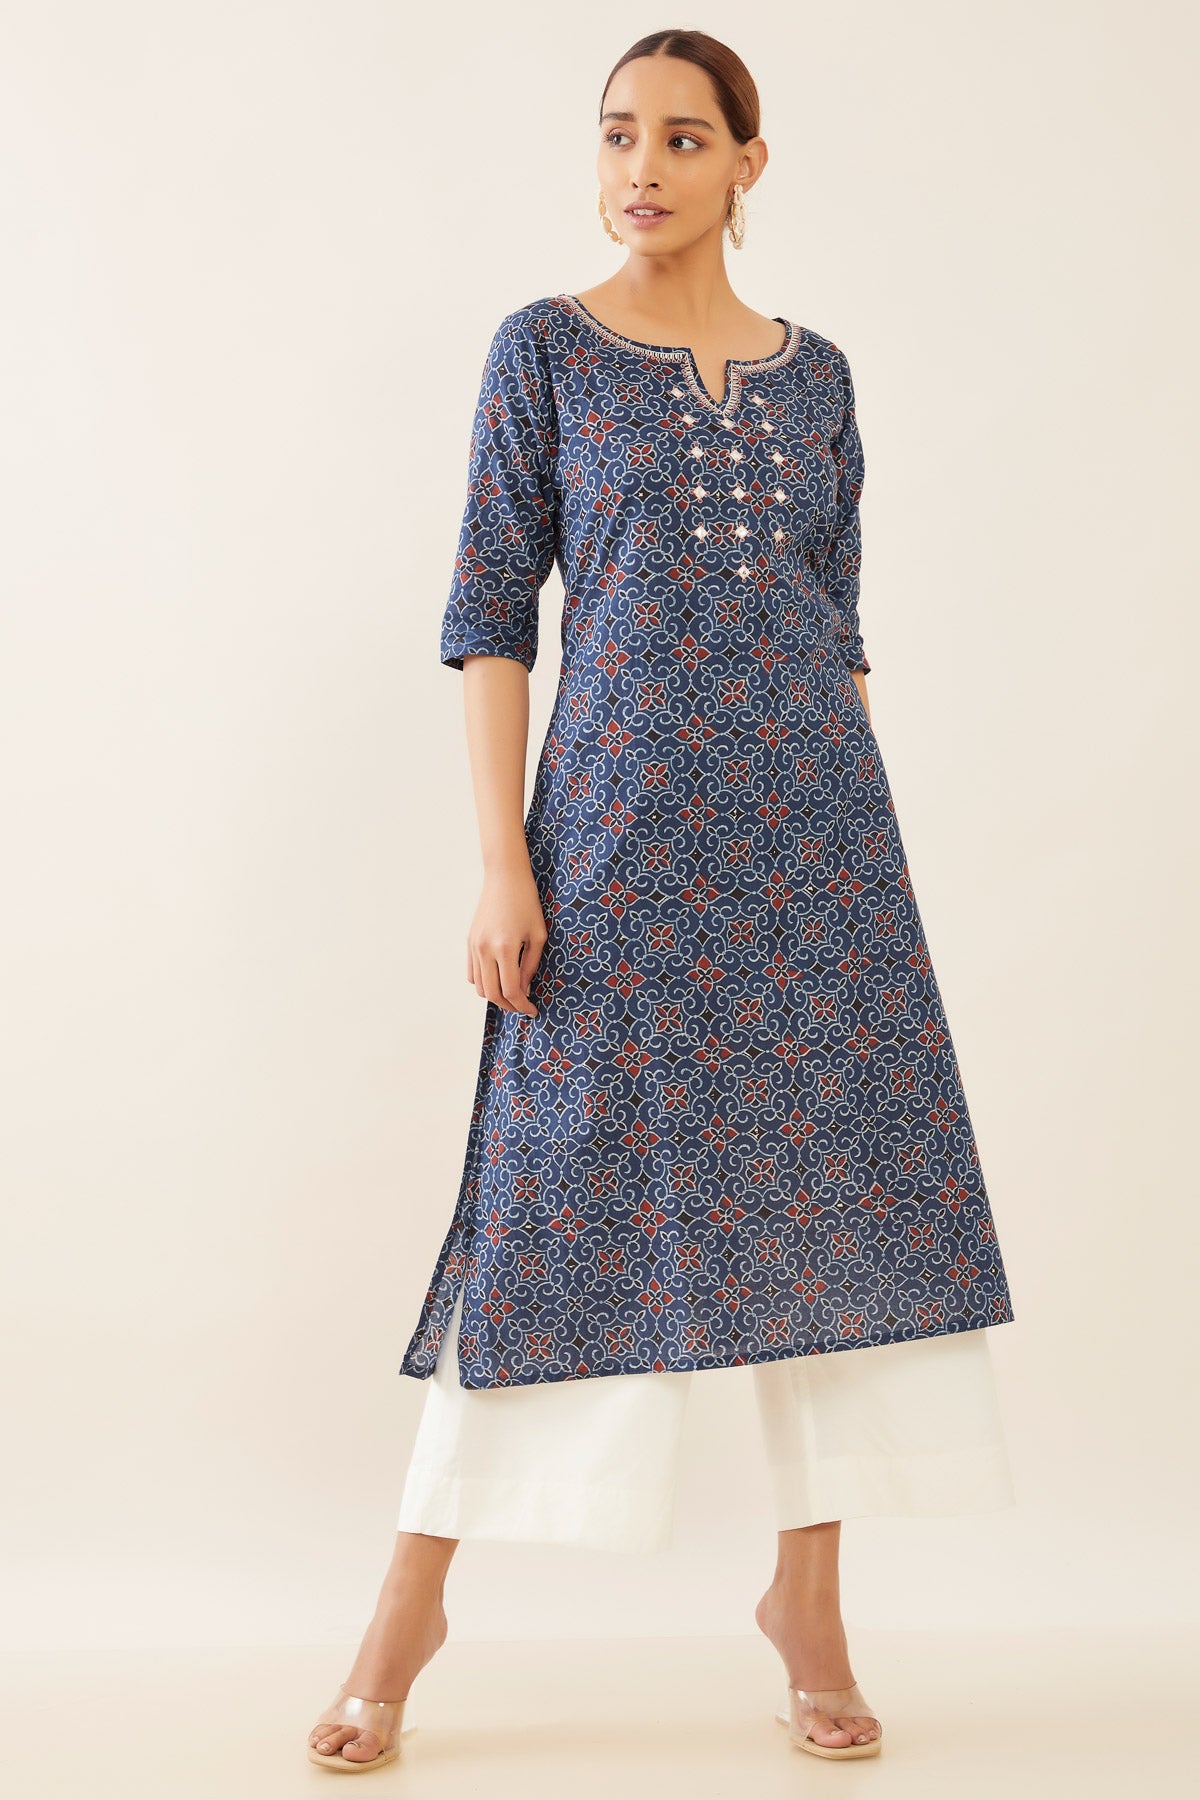 All Over Floral Printed & Foil Mirror Embroidered Kurta - Blue